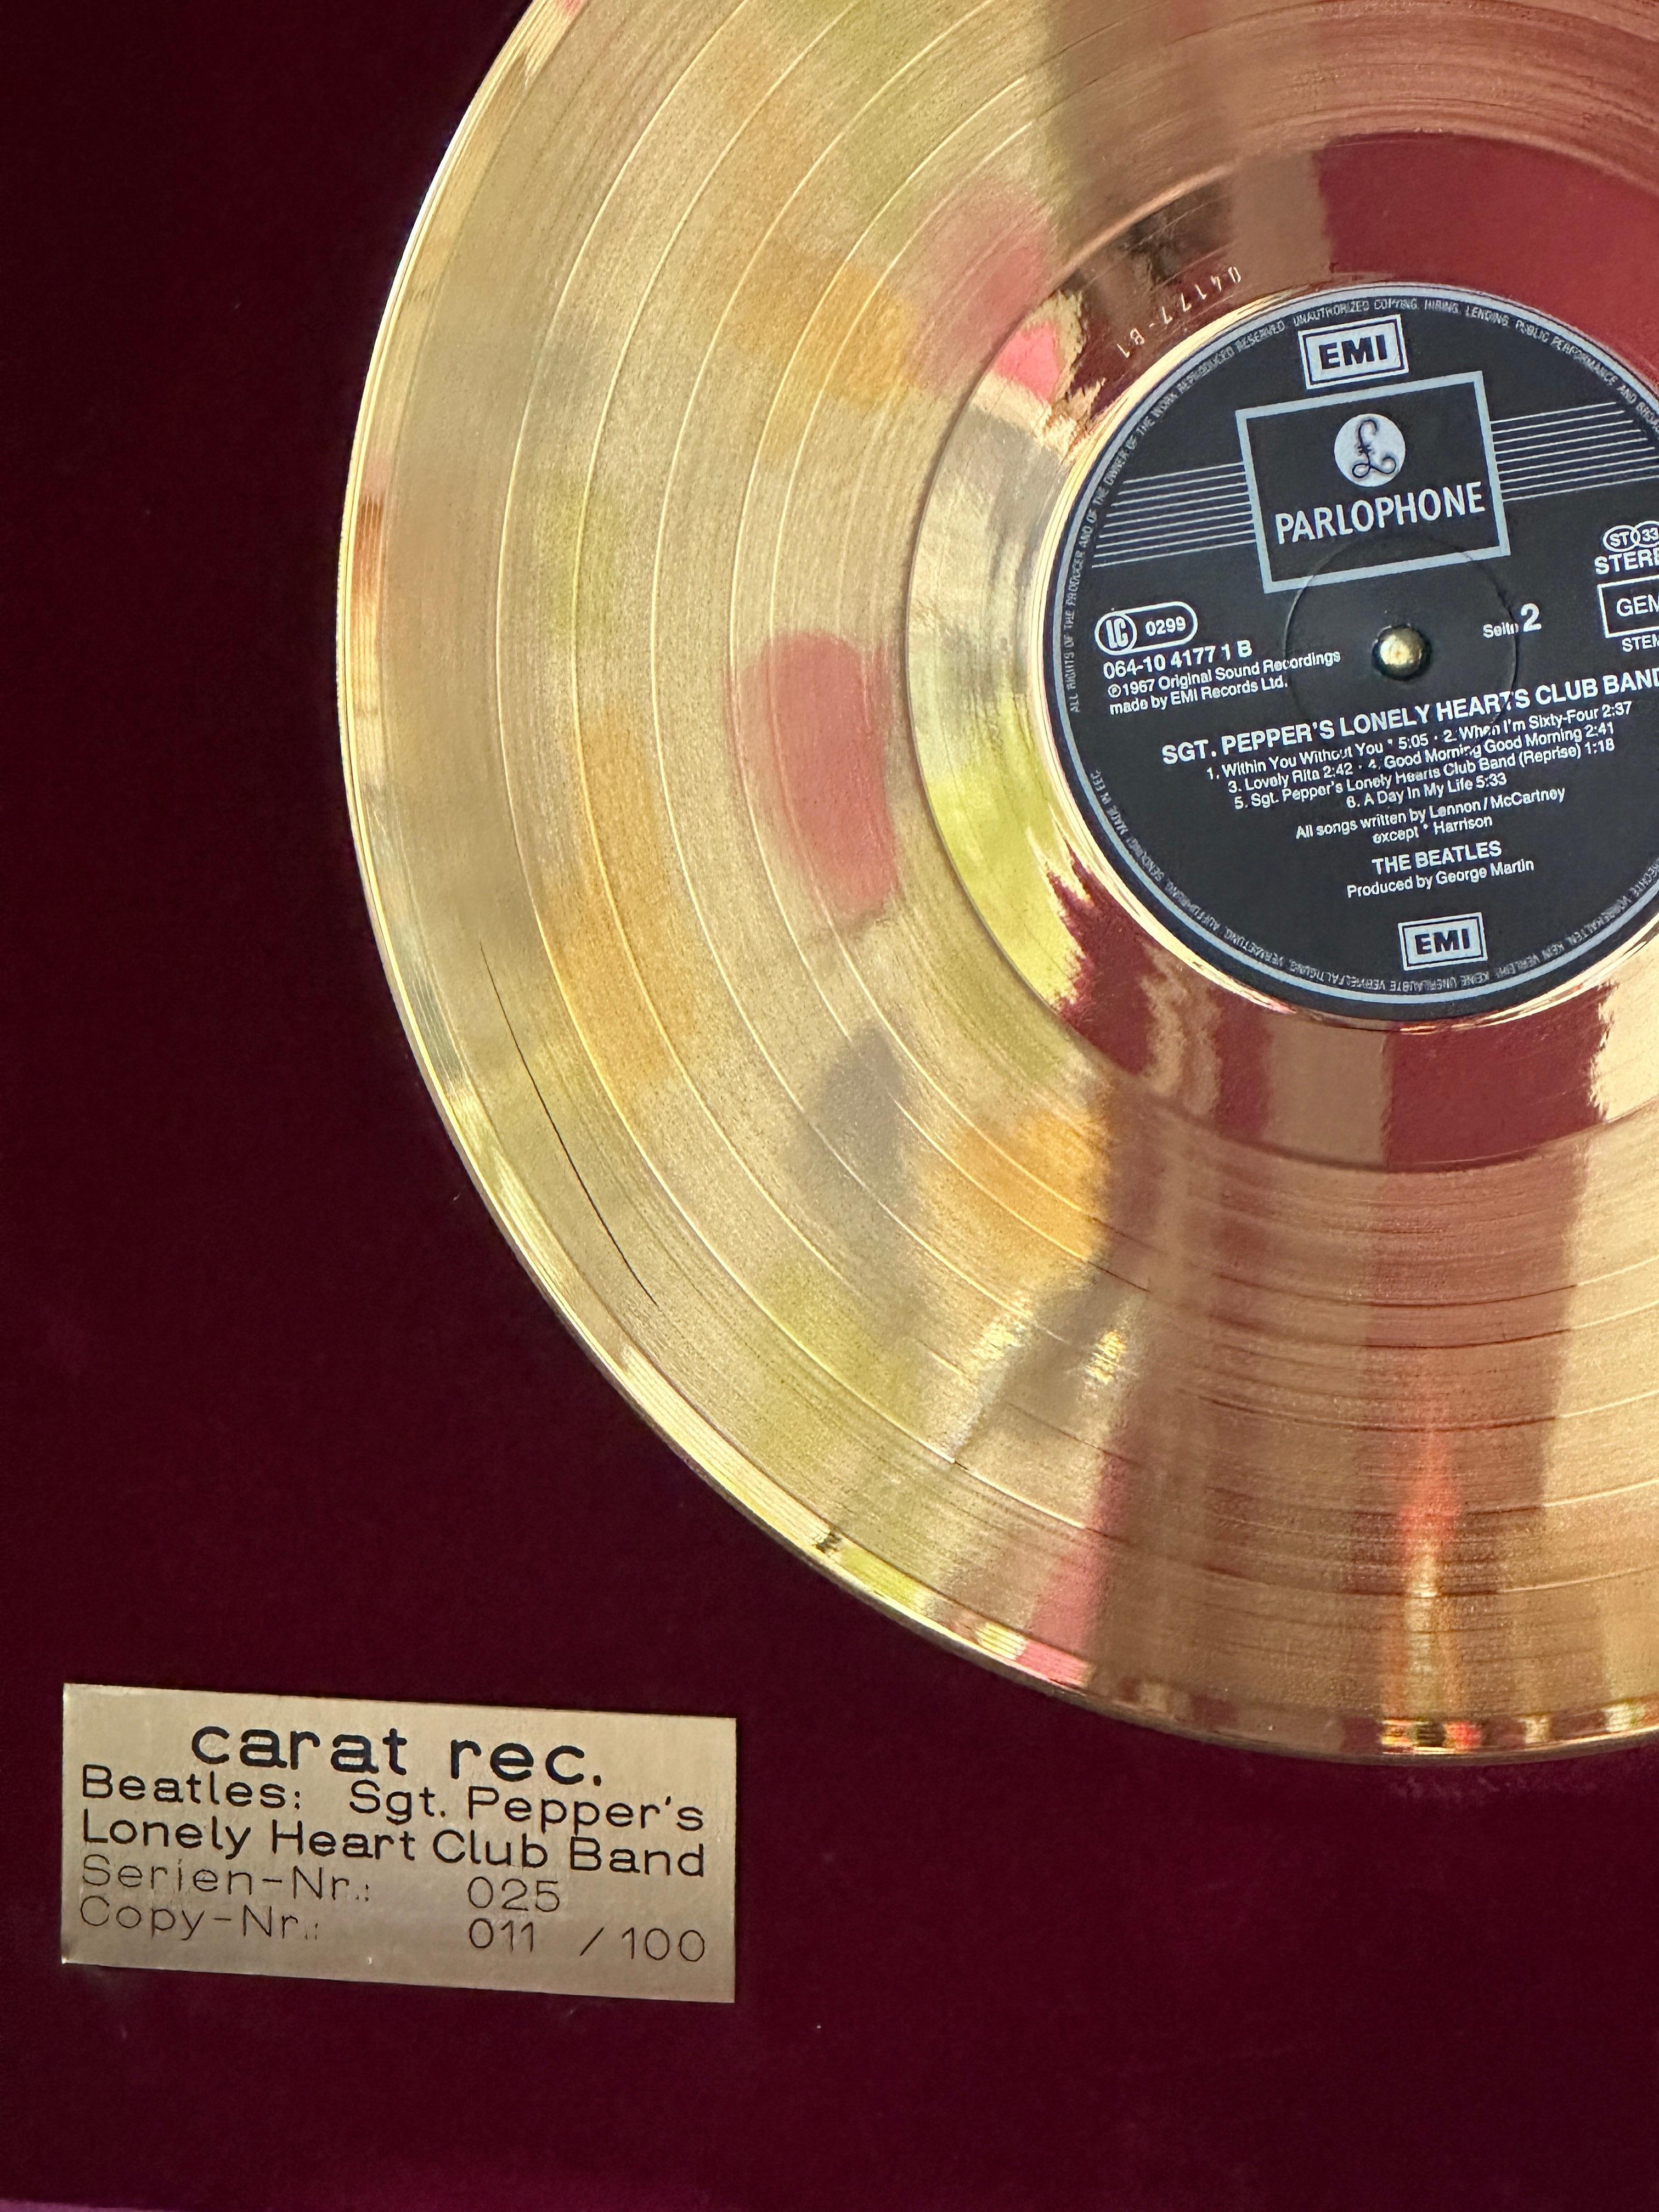 Modern Beatles Sgt. Peppers Lonely Hearts Club Band Golden Record Carat Rec 011/100 For Sale